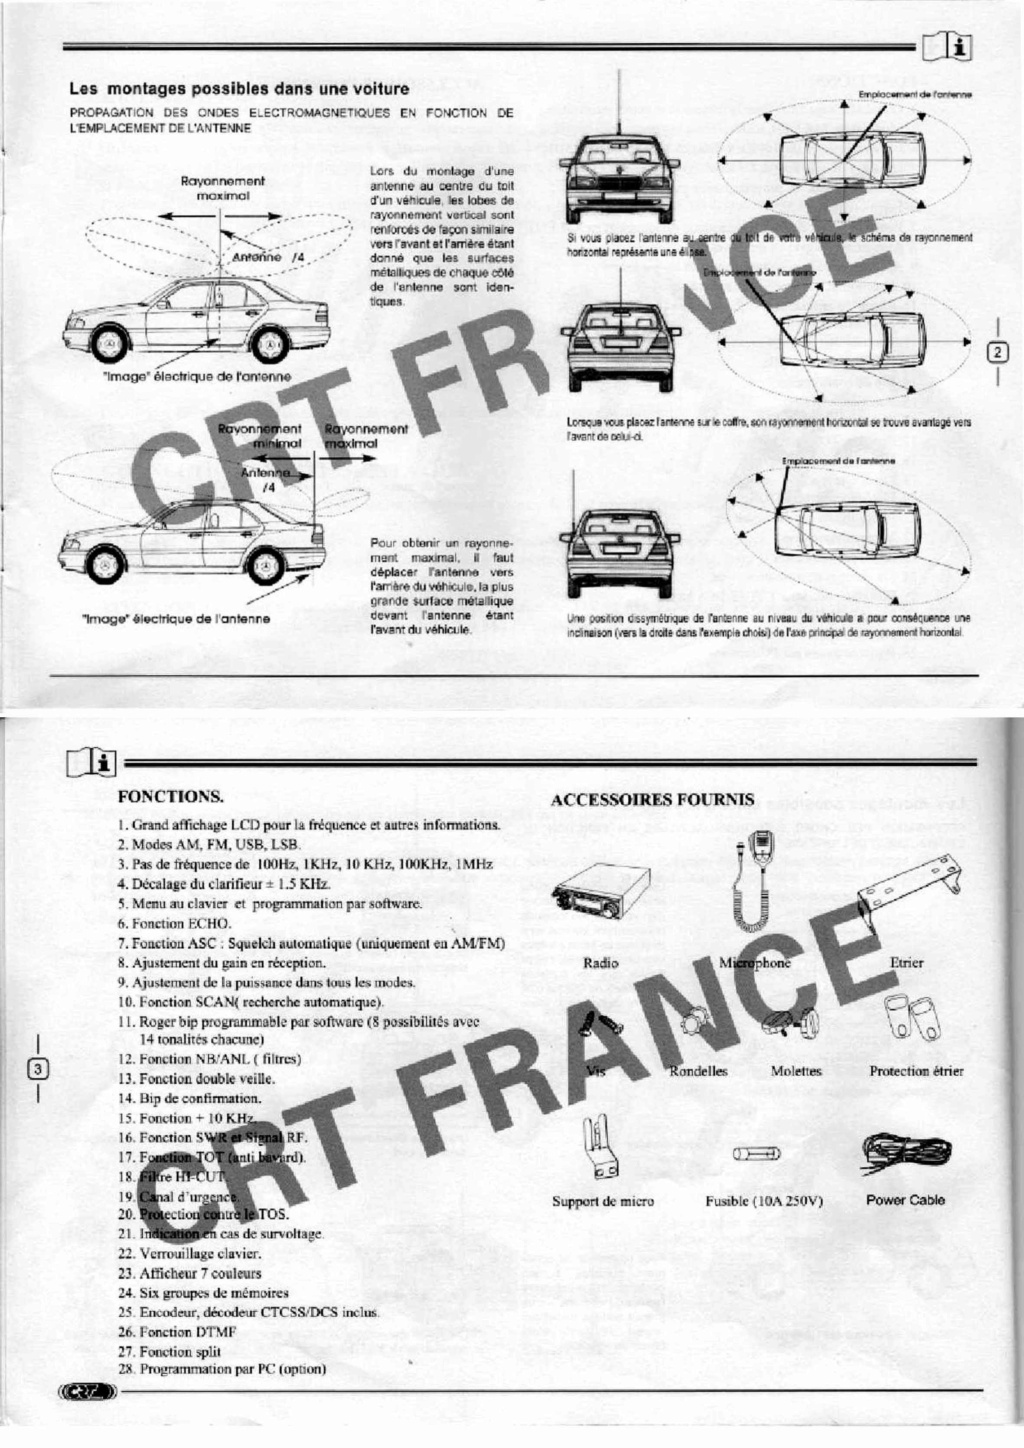 manuel - CRT SS 9900 v4 (Mobile) - Page 14 Feuill13